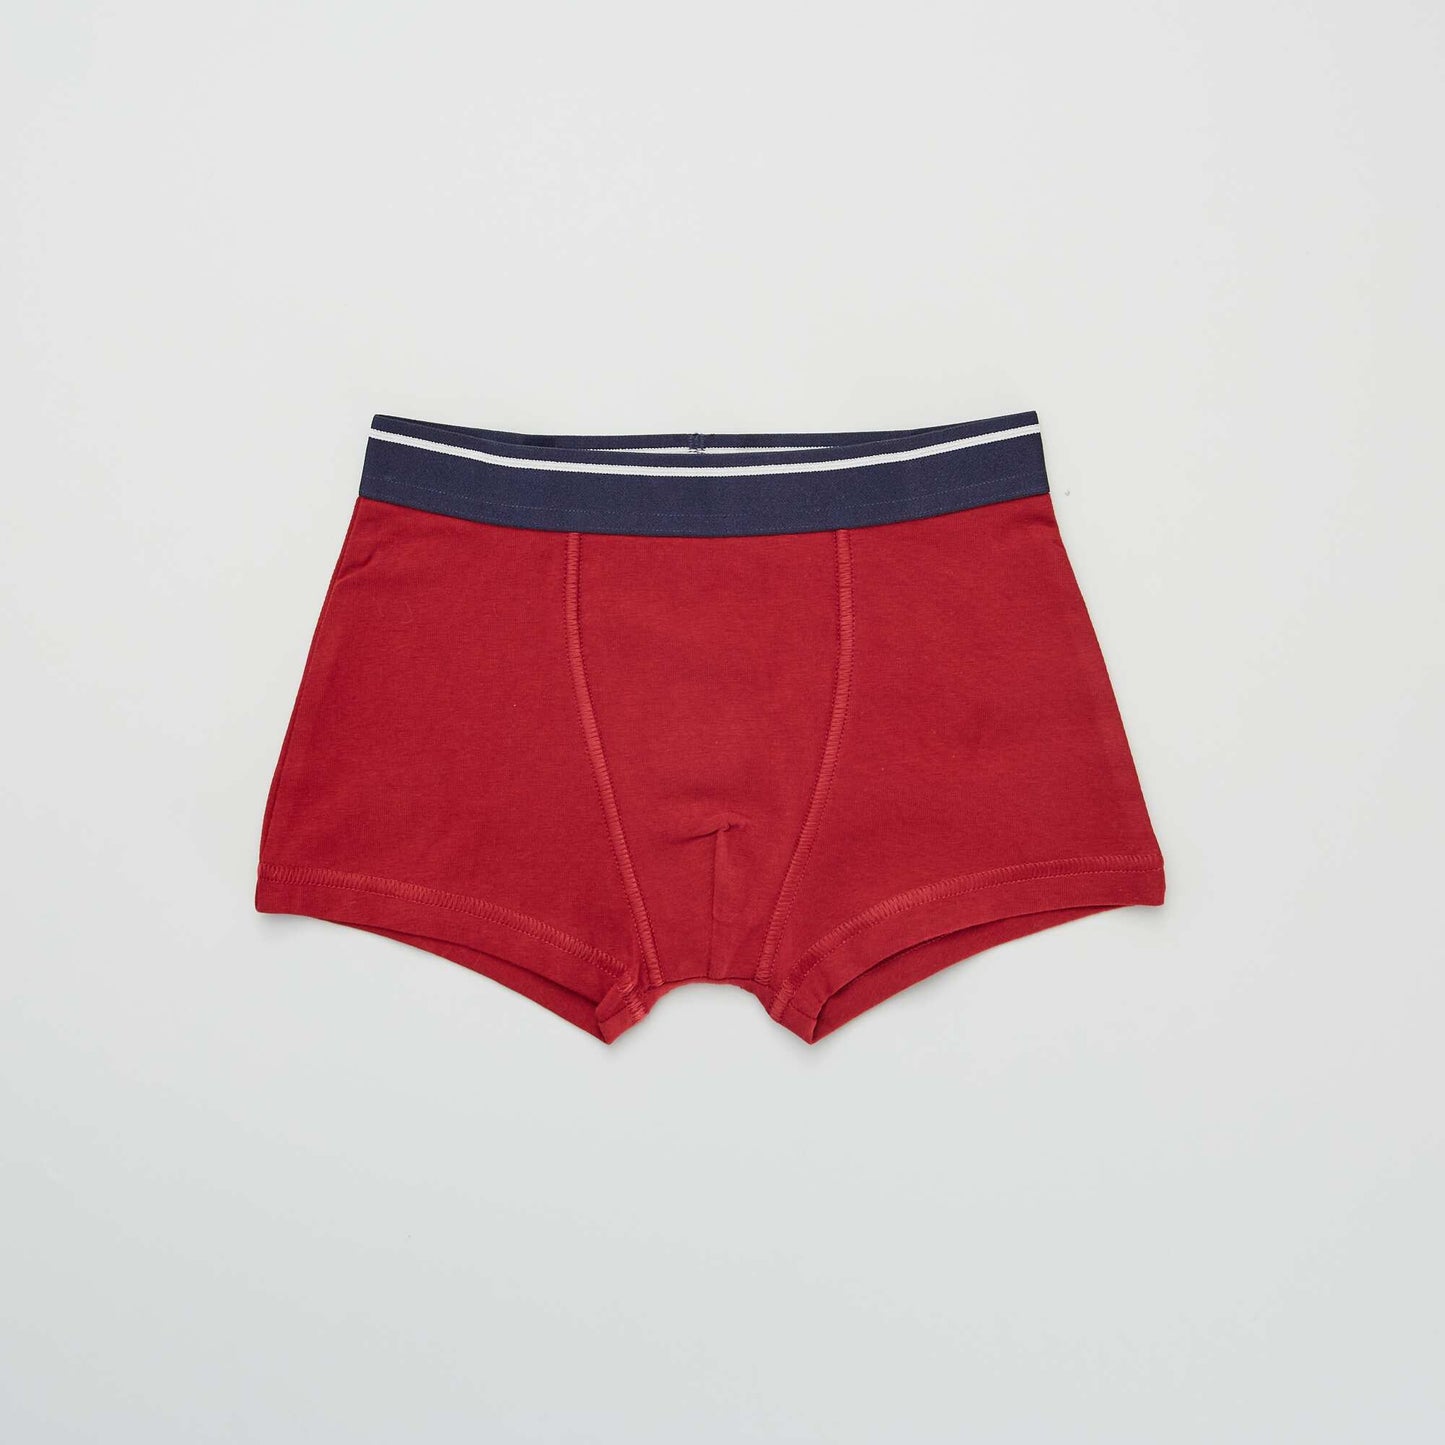 Pack of 3 pairs of boxer shorts SPORT